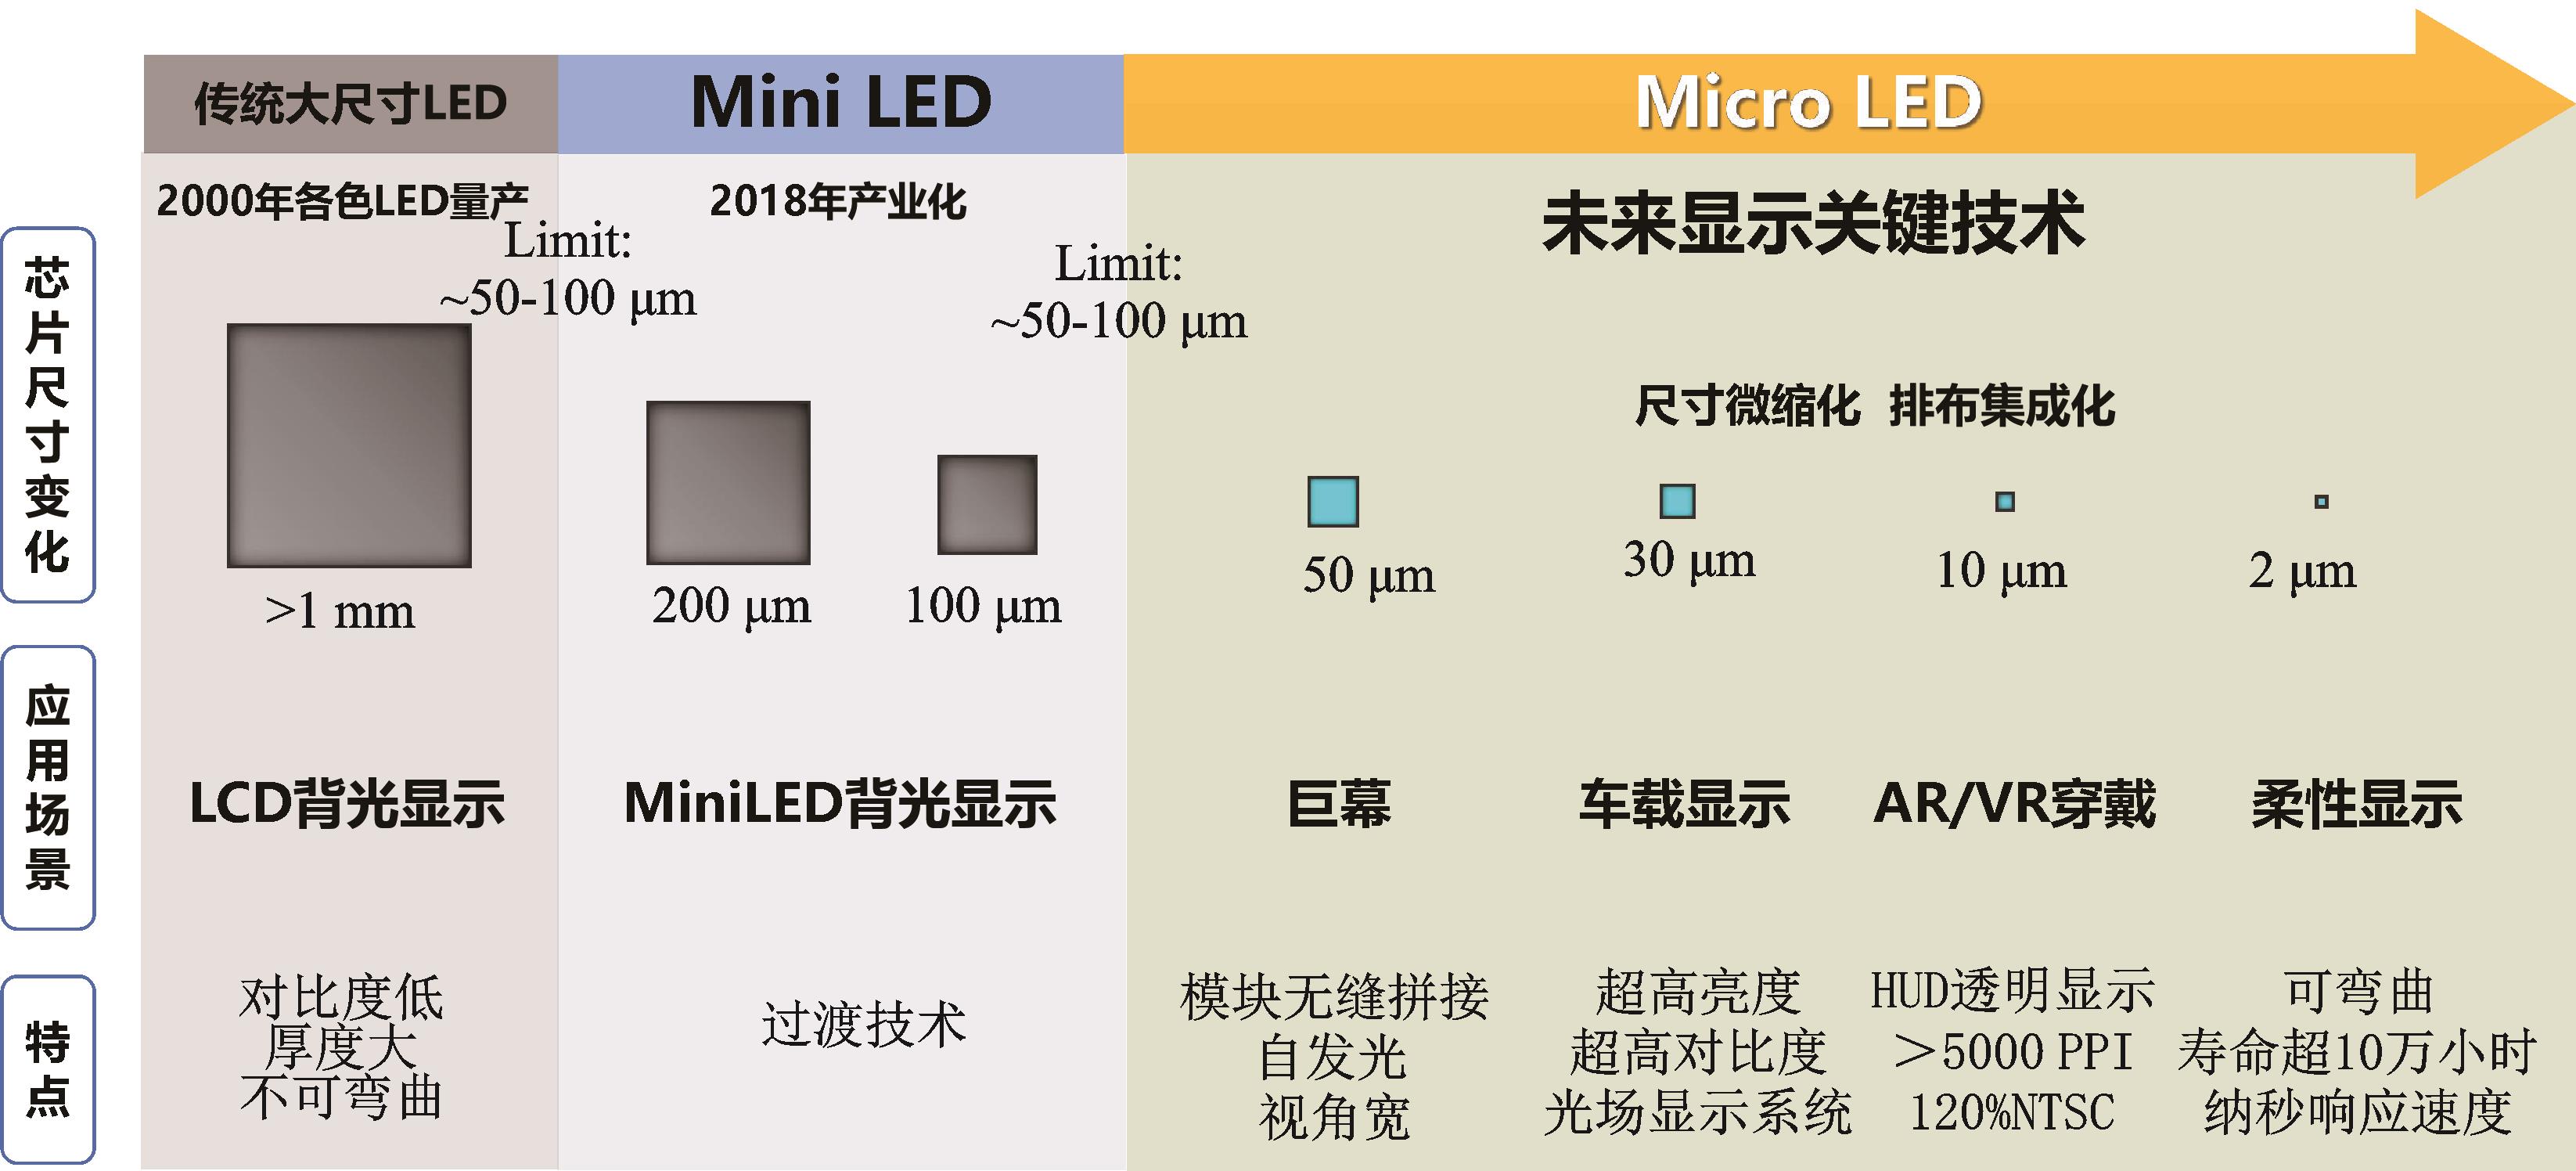 The overview and advantages of Micro LED